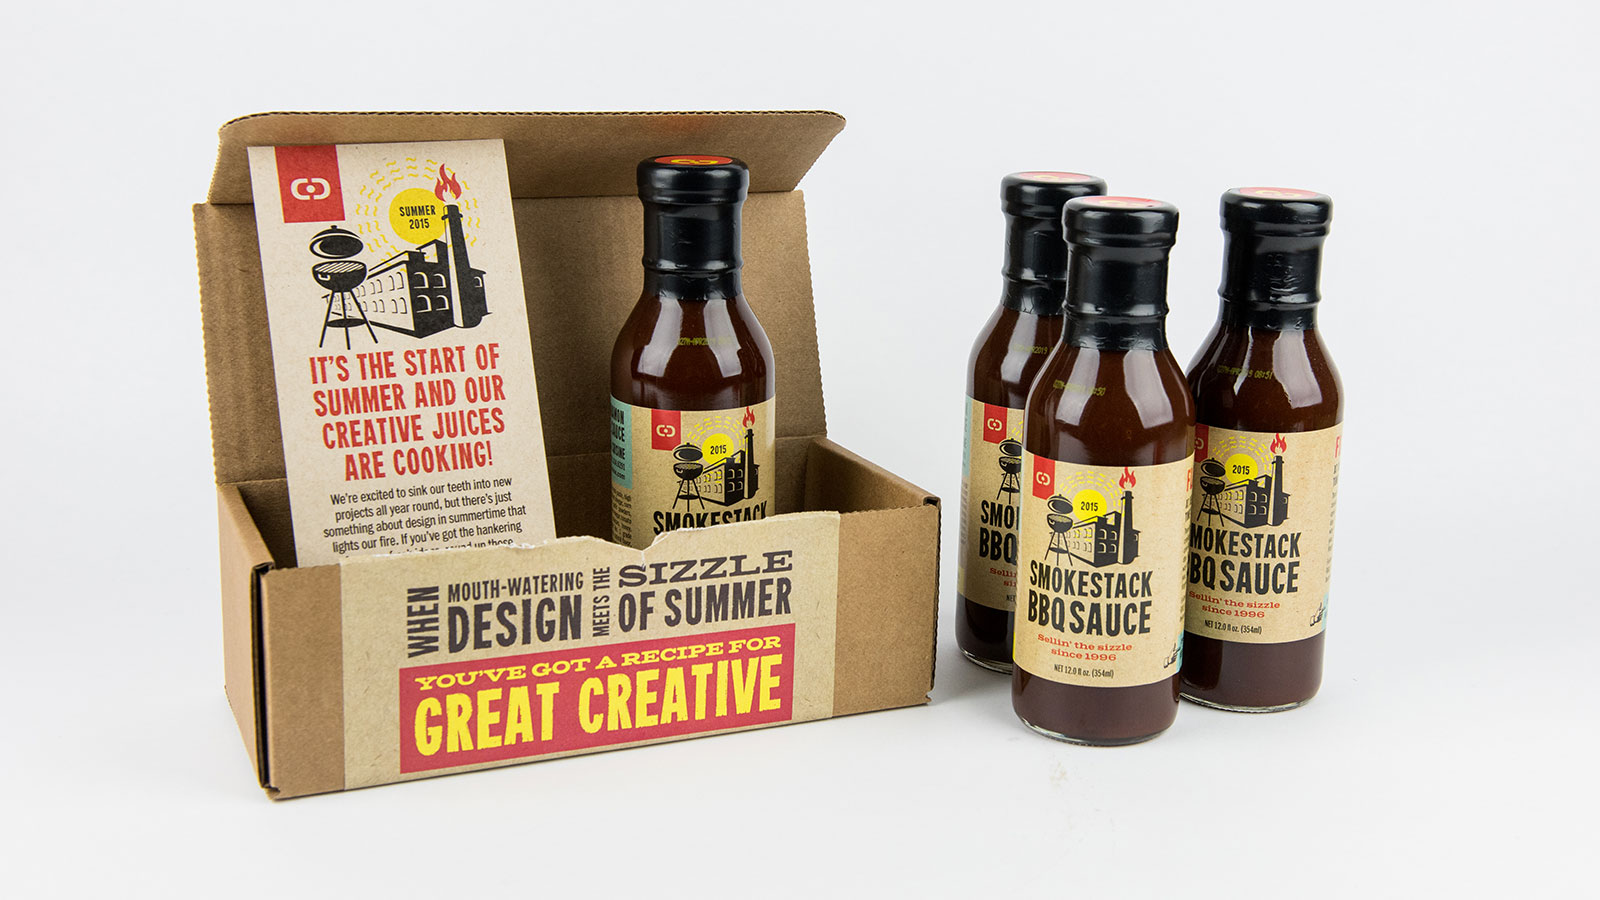 Smokestack BBQ Sauce Promotion Packaging with Multiple Bottles